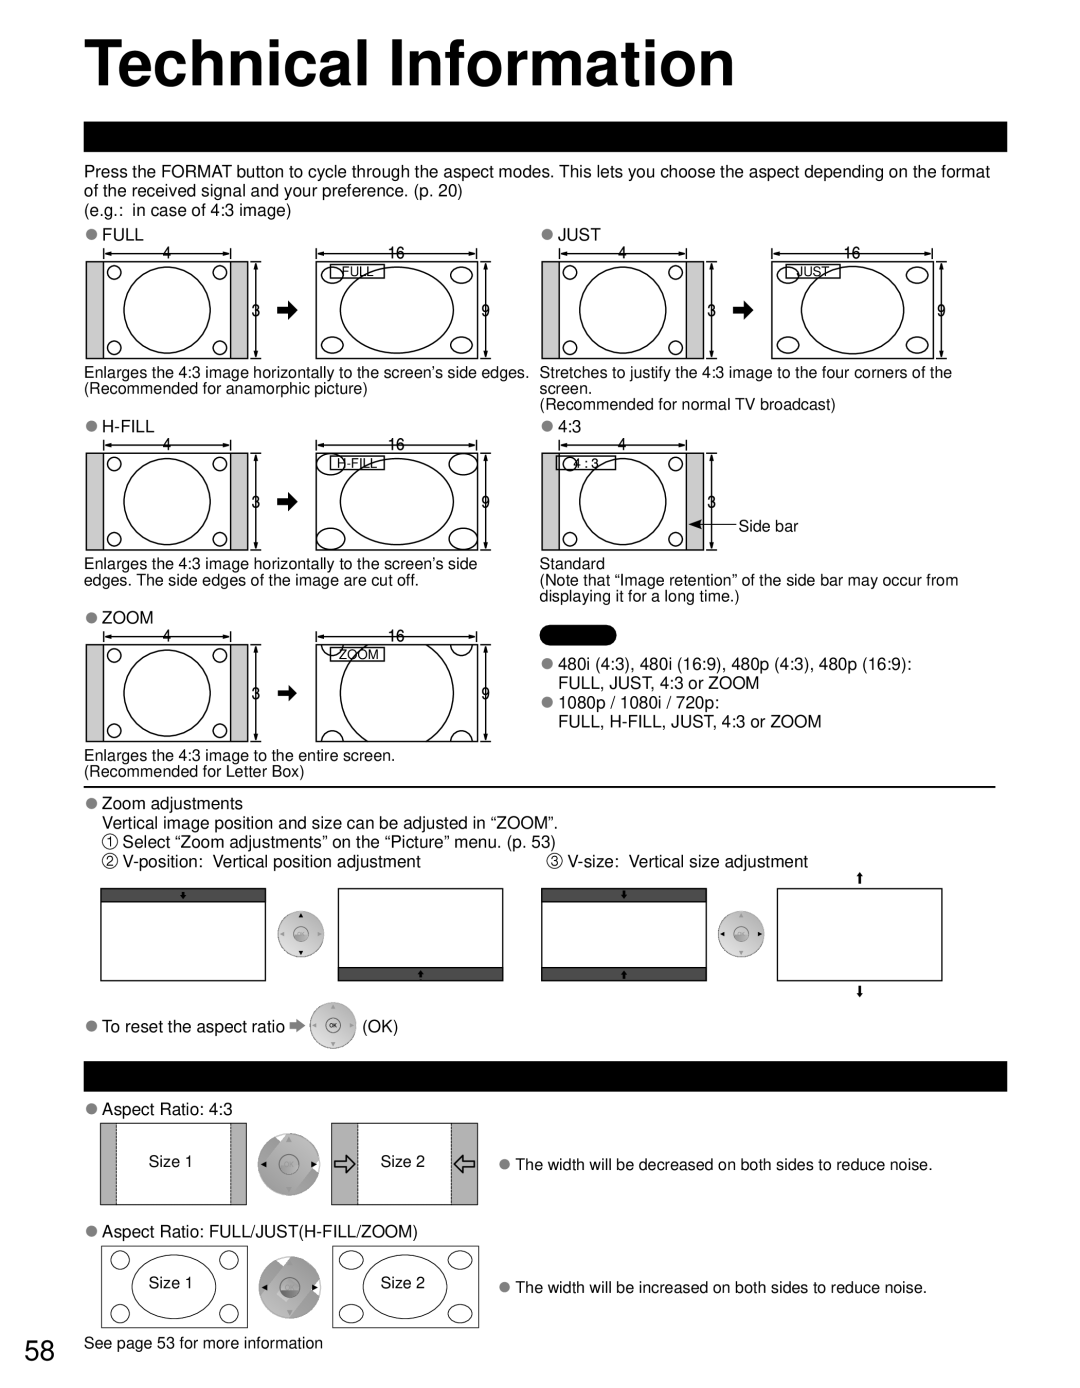 Panasonic TC-P55GT31 owner manual Technical Information, Aspect Ratio Format, Size, Aspect Ratio FULL/JUSTH-FILL/ZOOM 